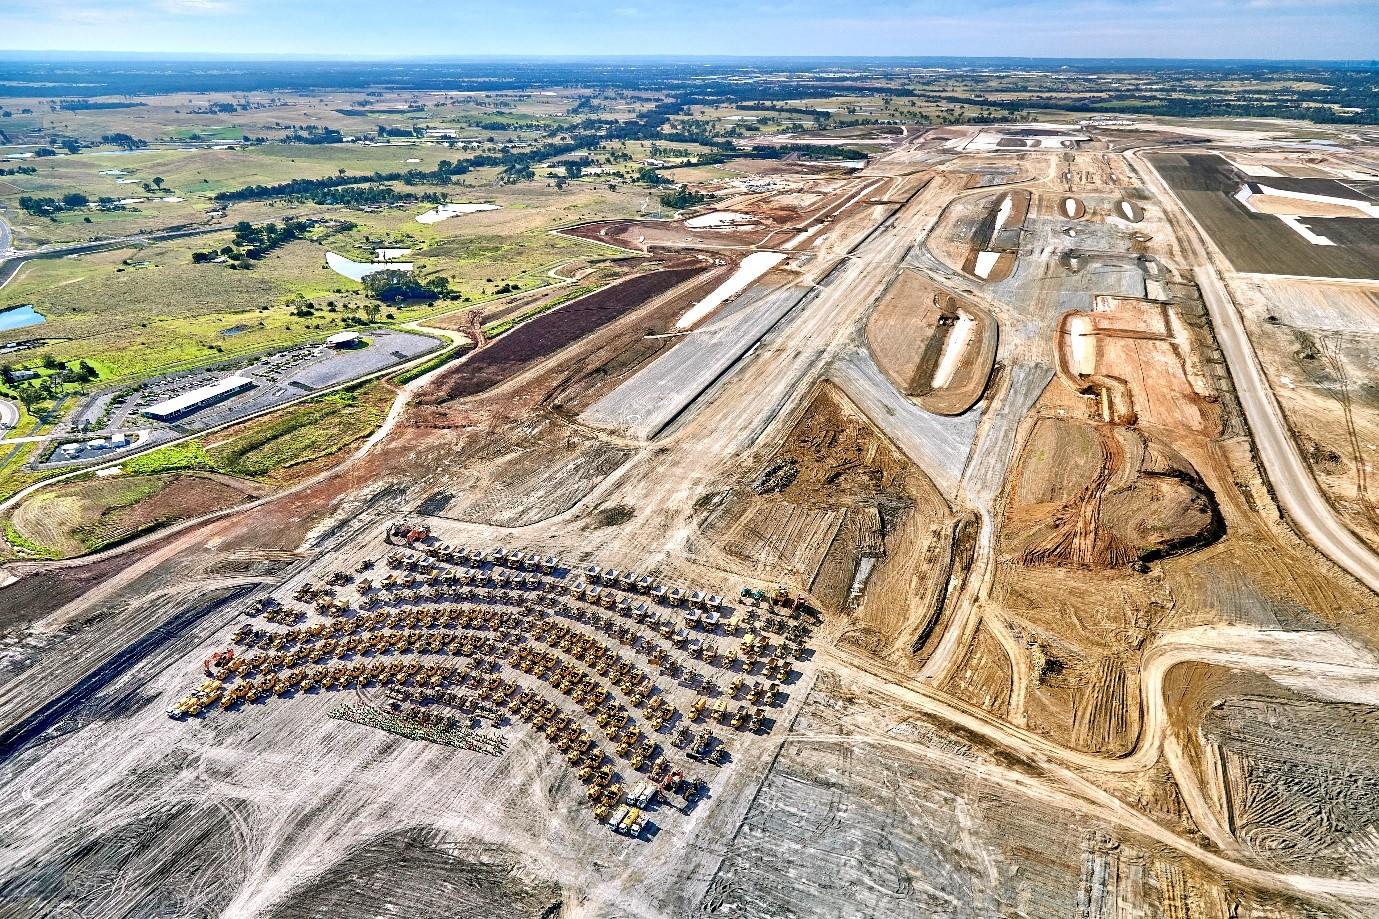 Aerial shot of plant equipment grouped together showing completion of bulk earthworks project. In the background, the outline of a runway and taxiways can be seen.